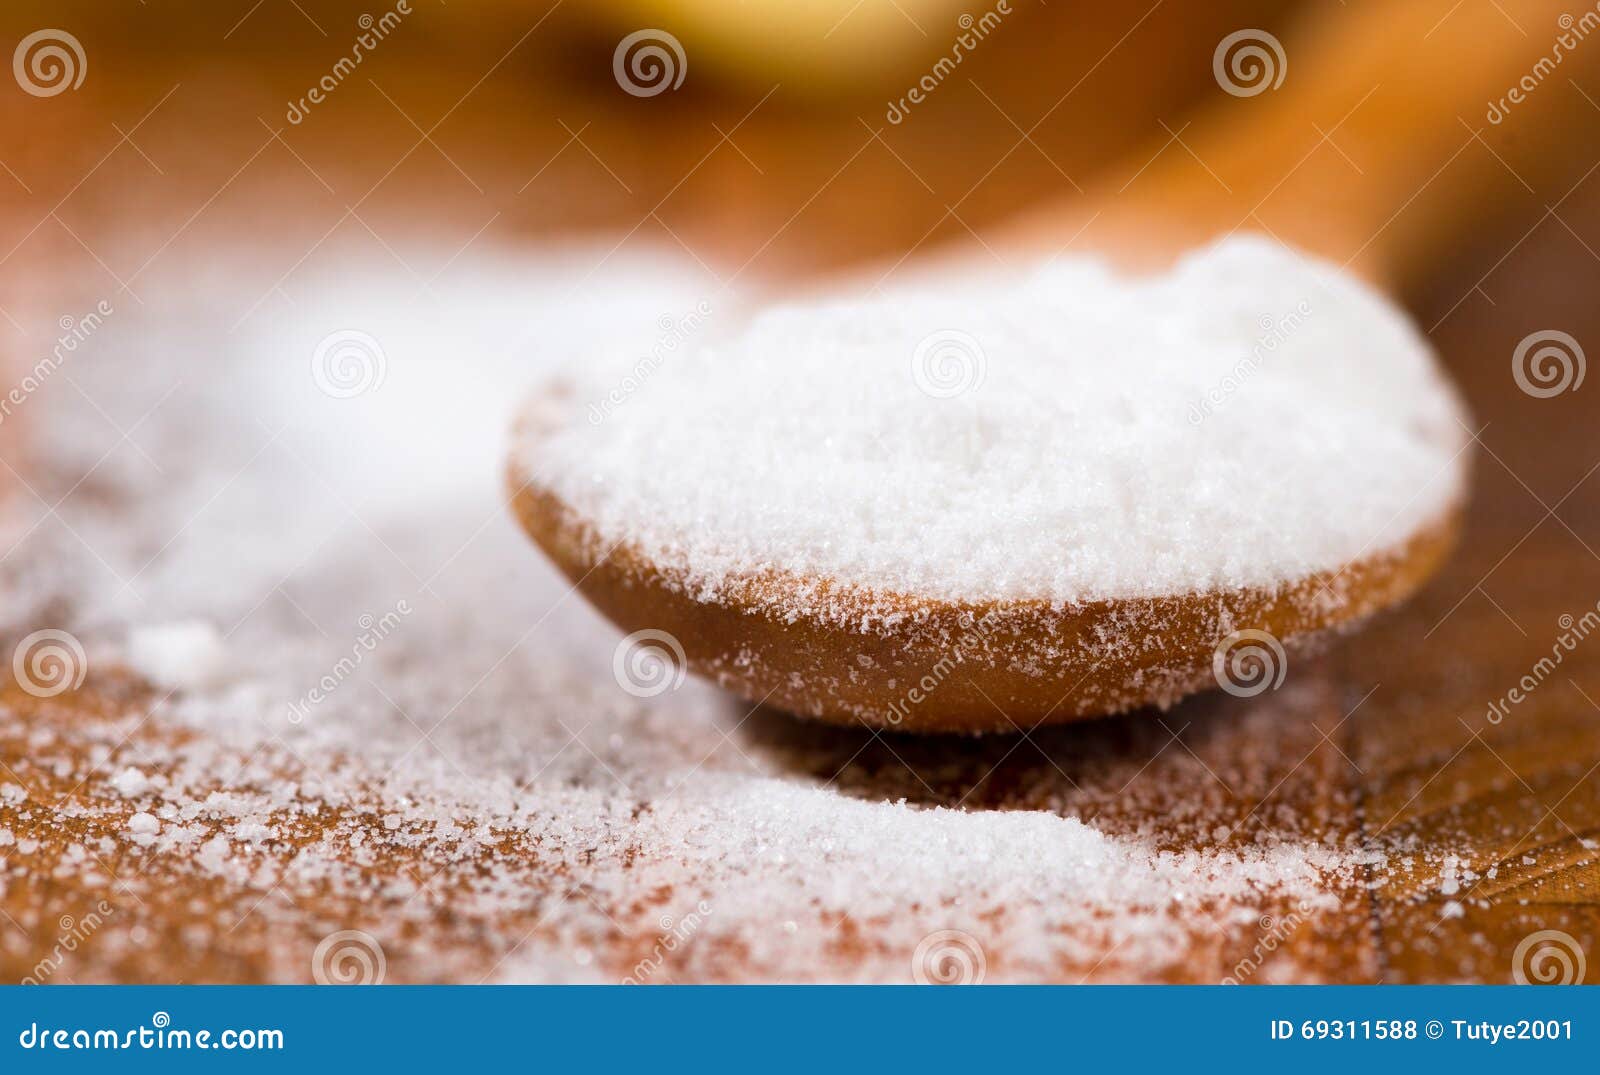 baking soda (sodium bicarbonate) in a wooden spoon